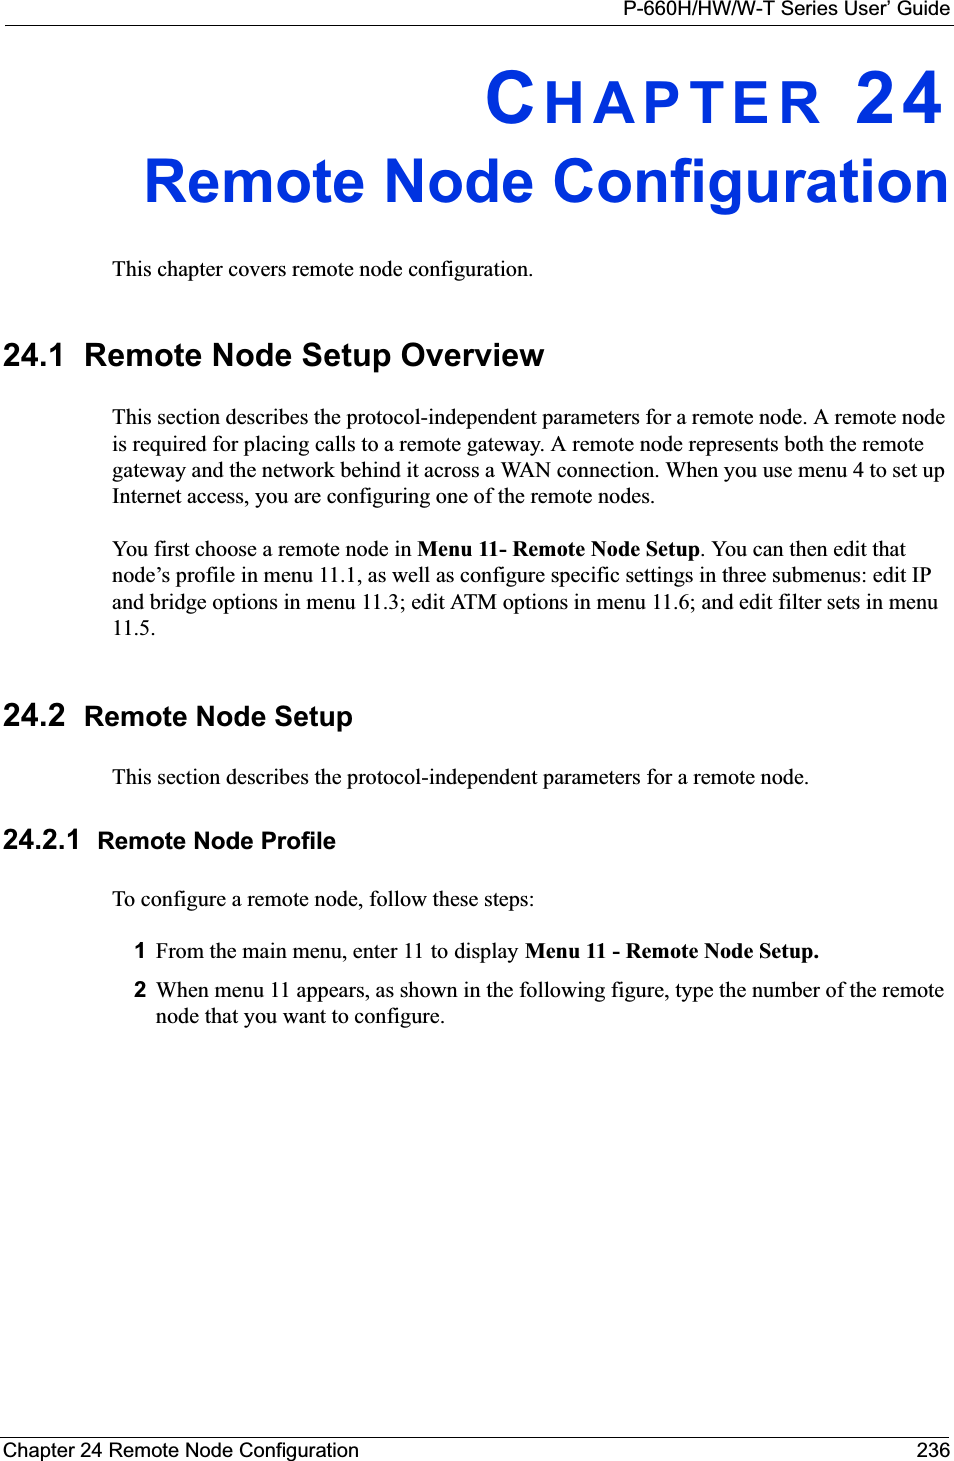 P-660H/HW/W-T Series User’ GuideChapter 24 Remote Node Configuration 236CHAPTER 24Remote Node ConfigurationThis chapter covers remote node configuration.24.1  Remote Node Setup OverviewThis section describes the protocol-independent parameters for a remote node. A remote node is required for placing calls to a remote gateway. A remote node represents both the remote gateway and the network behind it across a WAN connection. When you use menu 4 to set up Internet access, you are configuring one of the remote nodes.You first choose a remote node in Menu 11- Remote Node Setup. You can then edit that node’s profile in menu 11.1, as well as configure specific settings in three submenus: edit IP and bridge options in menu 11.3; edit ATM options in menu 11.6; and edit filter sets in menu 11.5.24.2 Remote Node SetupThis section describes the protocol-independent parameters for a remote node.24.2.1 Remote Node ProfileTo configure a remote node, follow these steps:1From the main menu, enter 11 to display Menu 11 - Remote Node Setup.2When menu 11 appears, as shown in the following figure, type the number of the remote node that you want to configure.